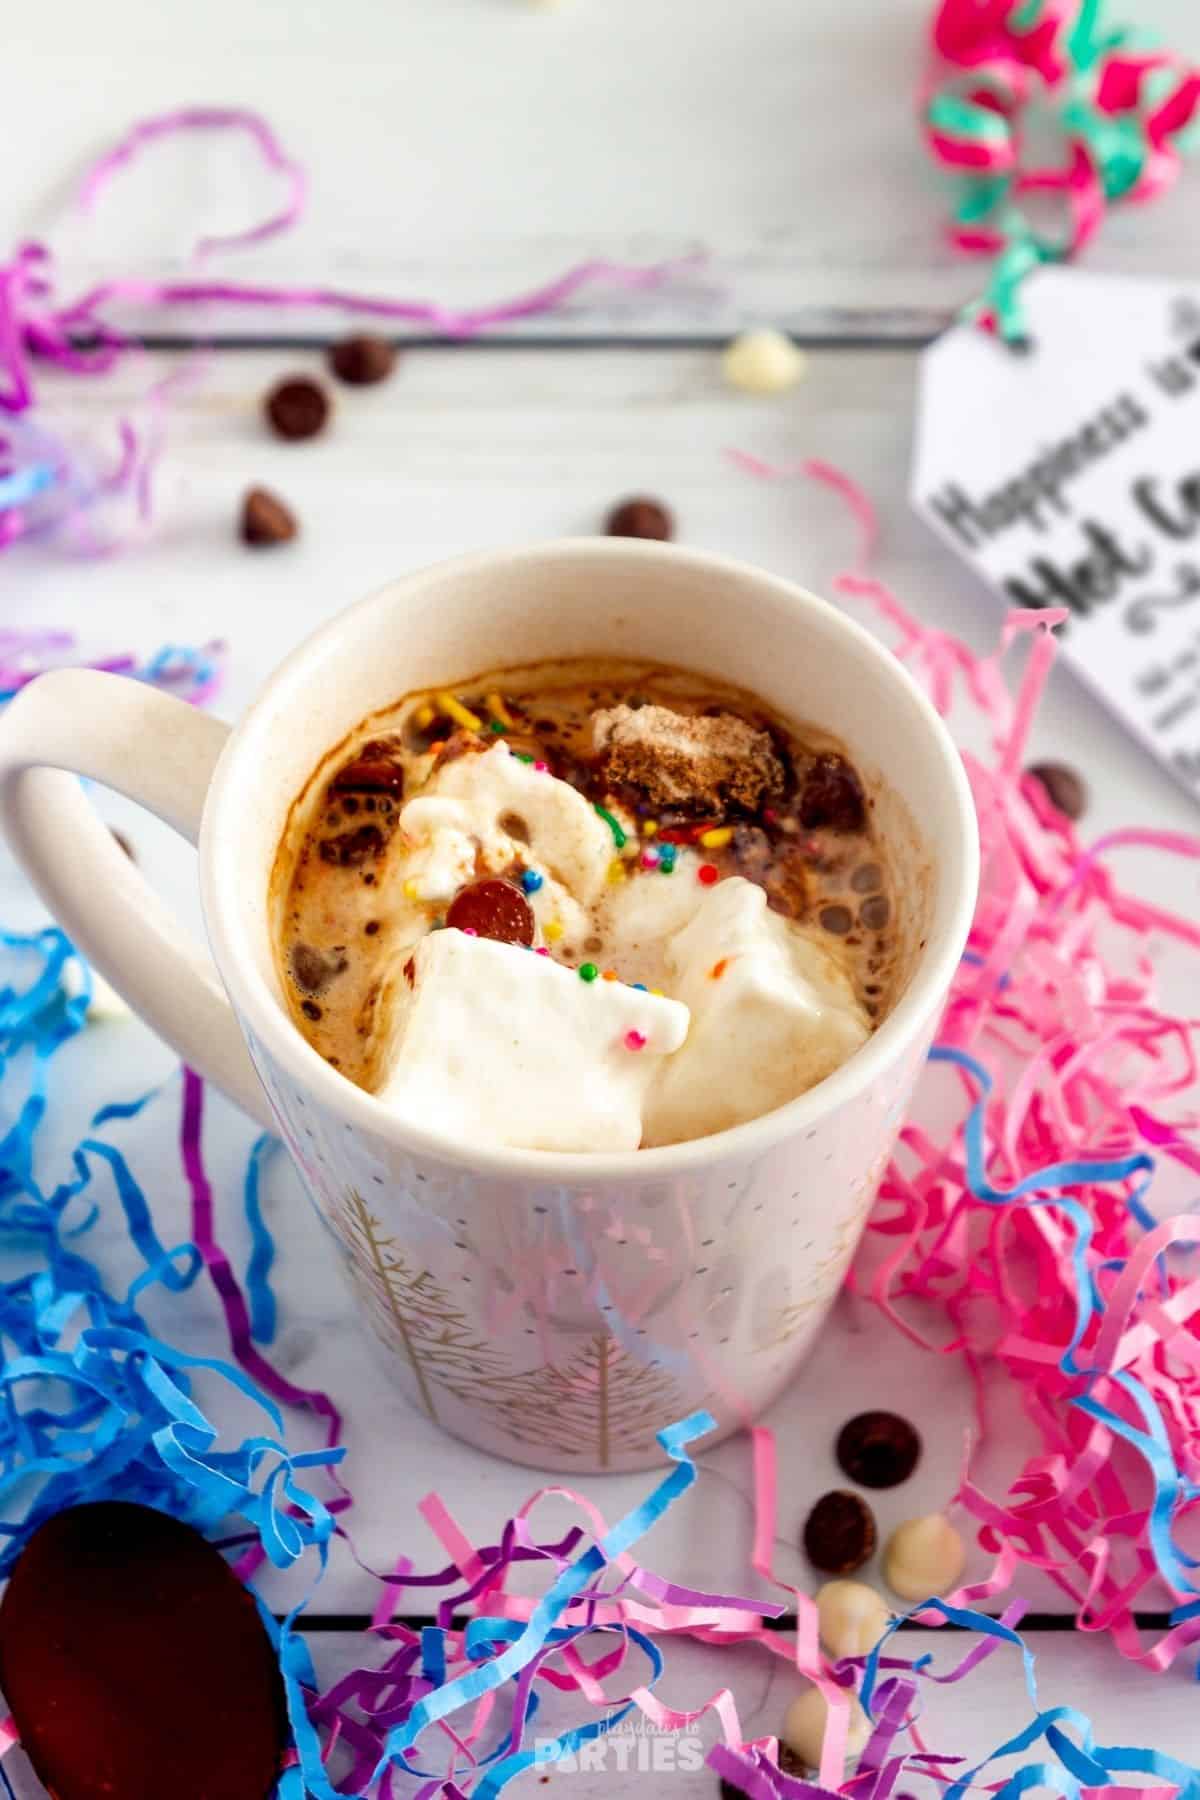 A mug of hot chocolate is surrounded by party decorations.